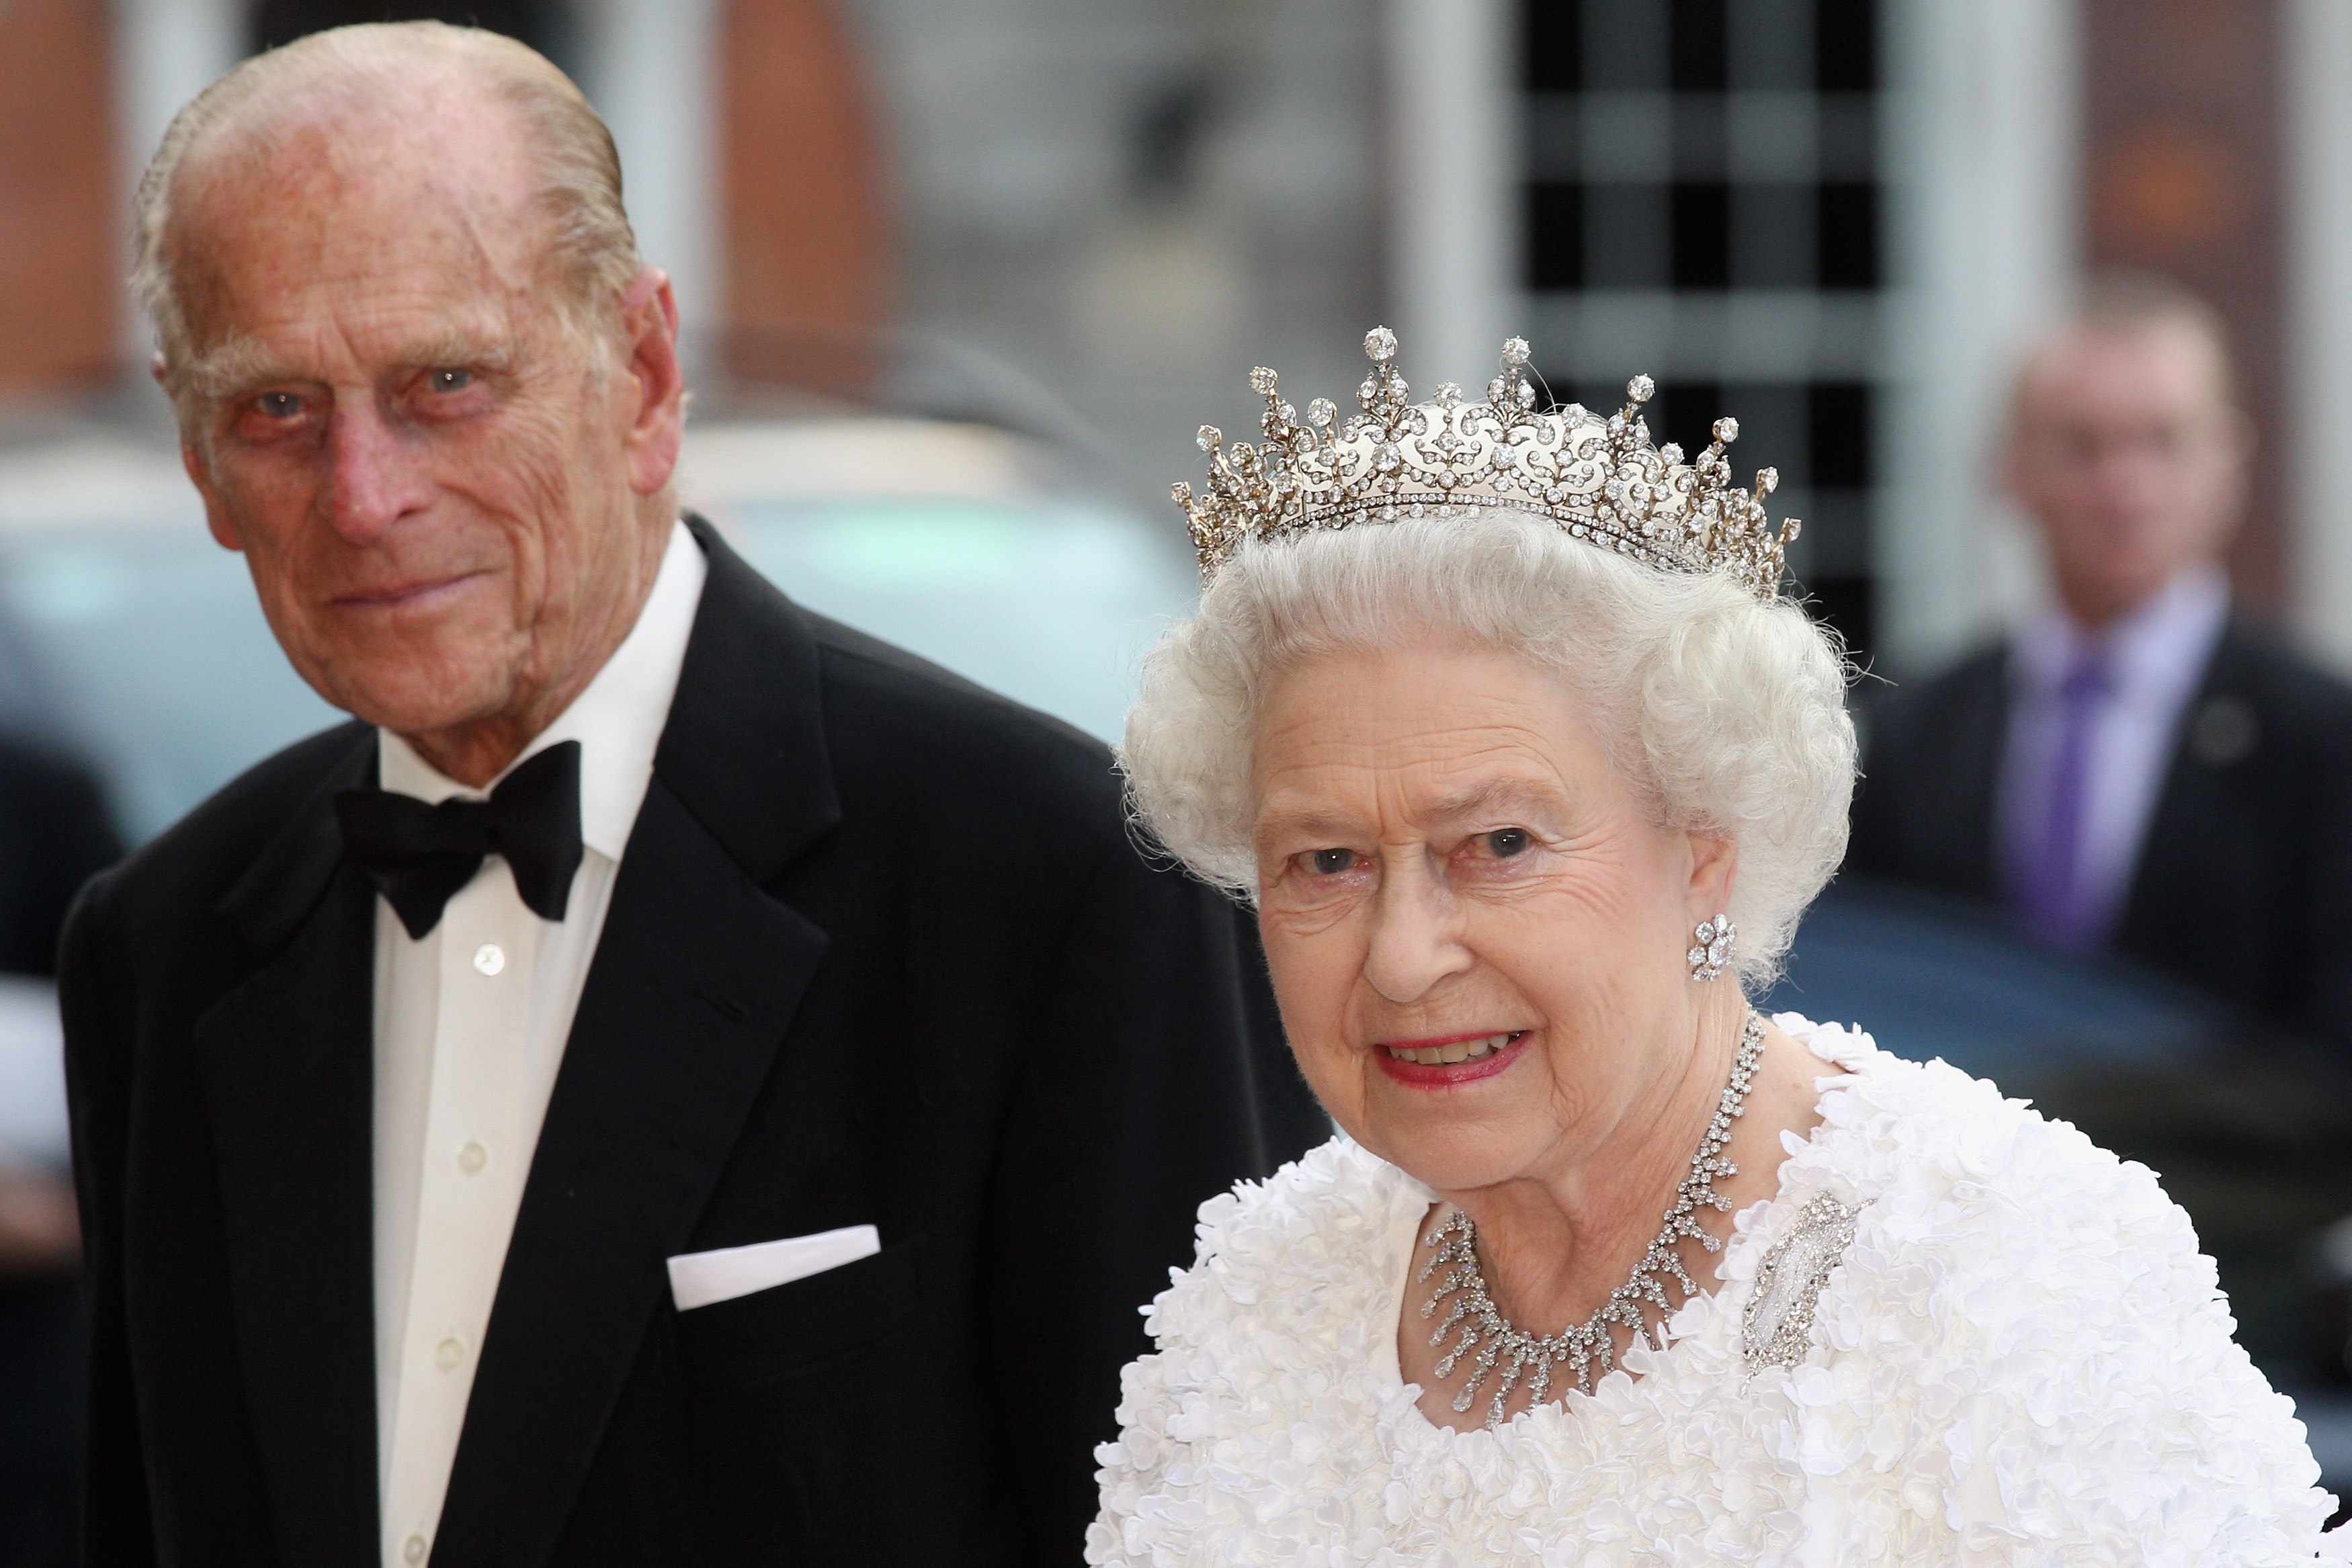 Prince Philip in a tuxedo and Queen Elizabeth in a white gown and tiara as they attend state banquet in Dublin